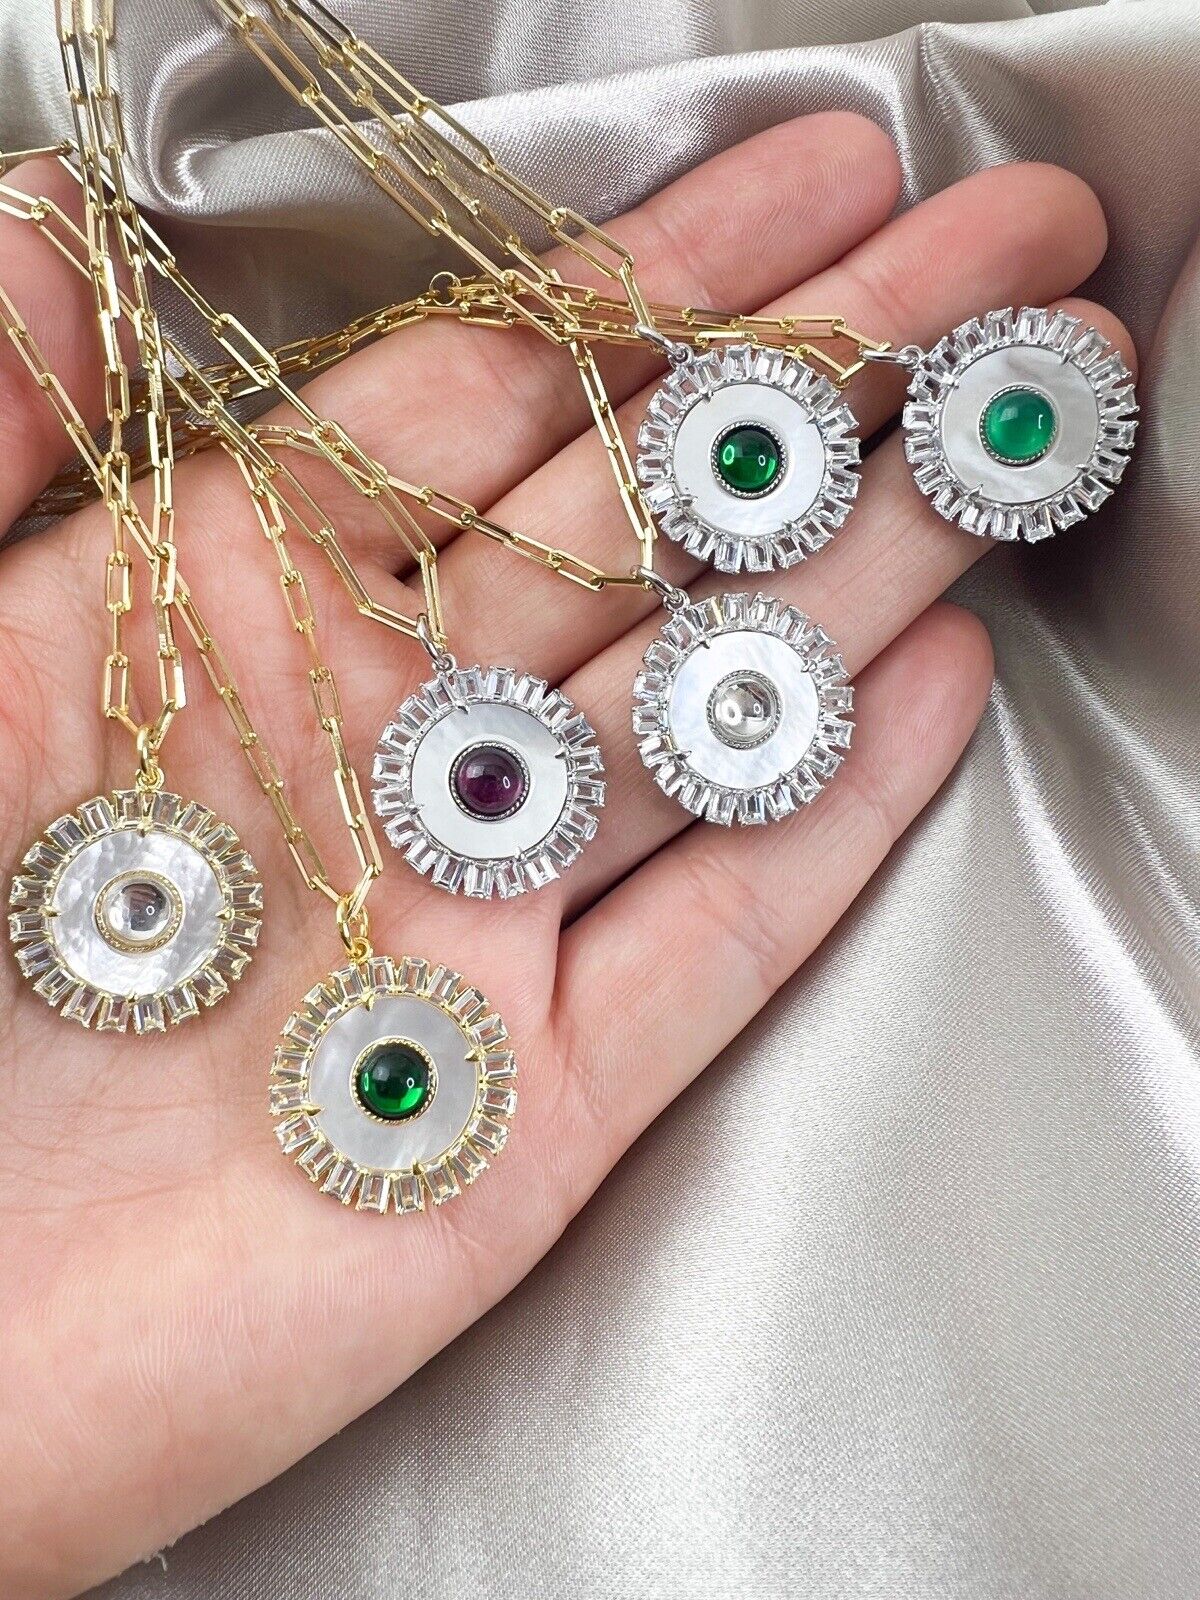 【Green Crystal Rhodium Plated】Lucky Charm Pendant Necklace Evil Eye Sterling Silver925 Mother of Pearl Beautiful